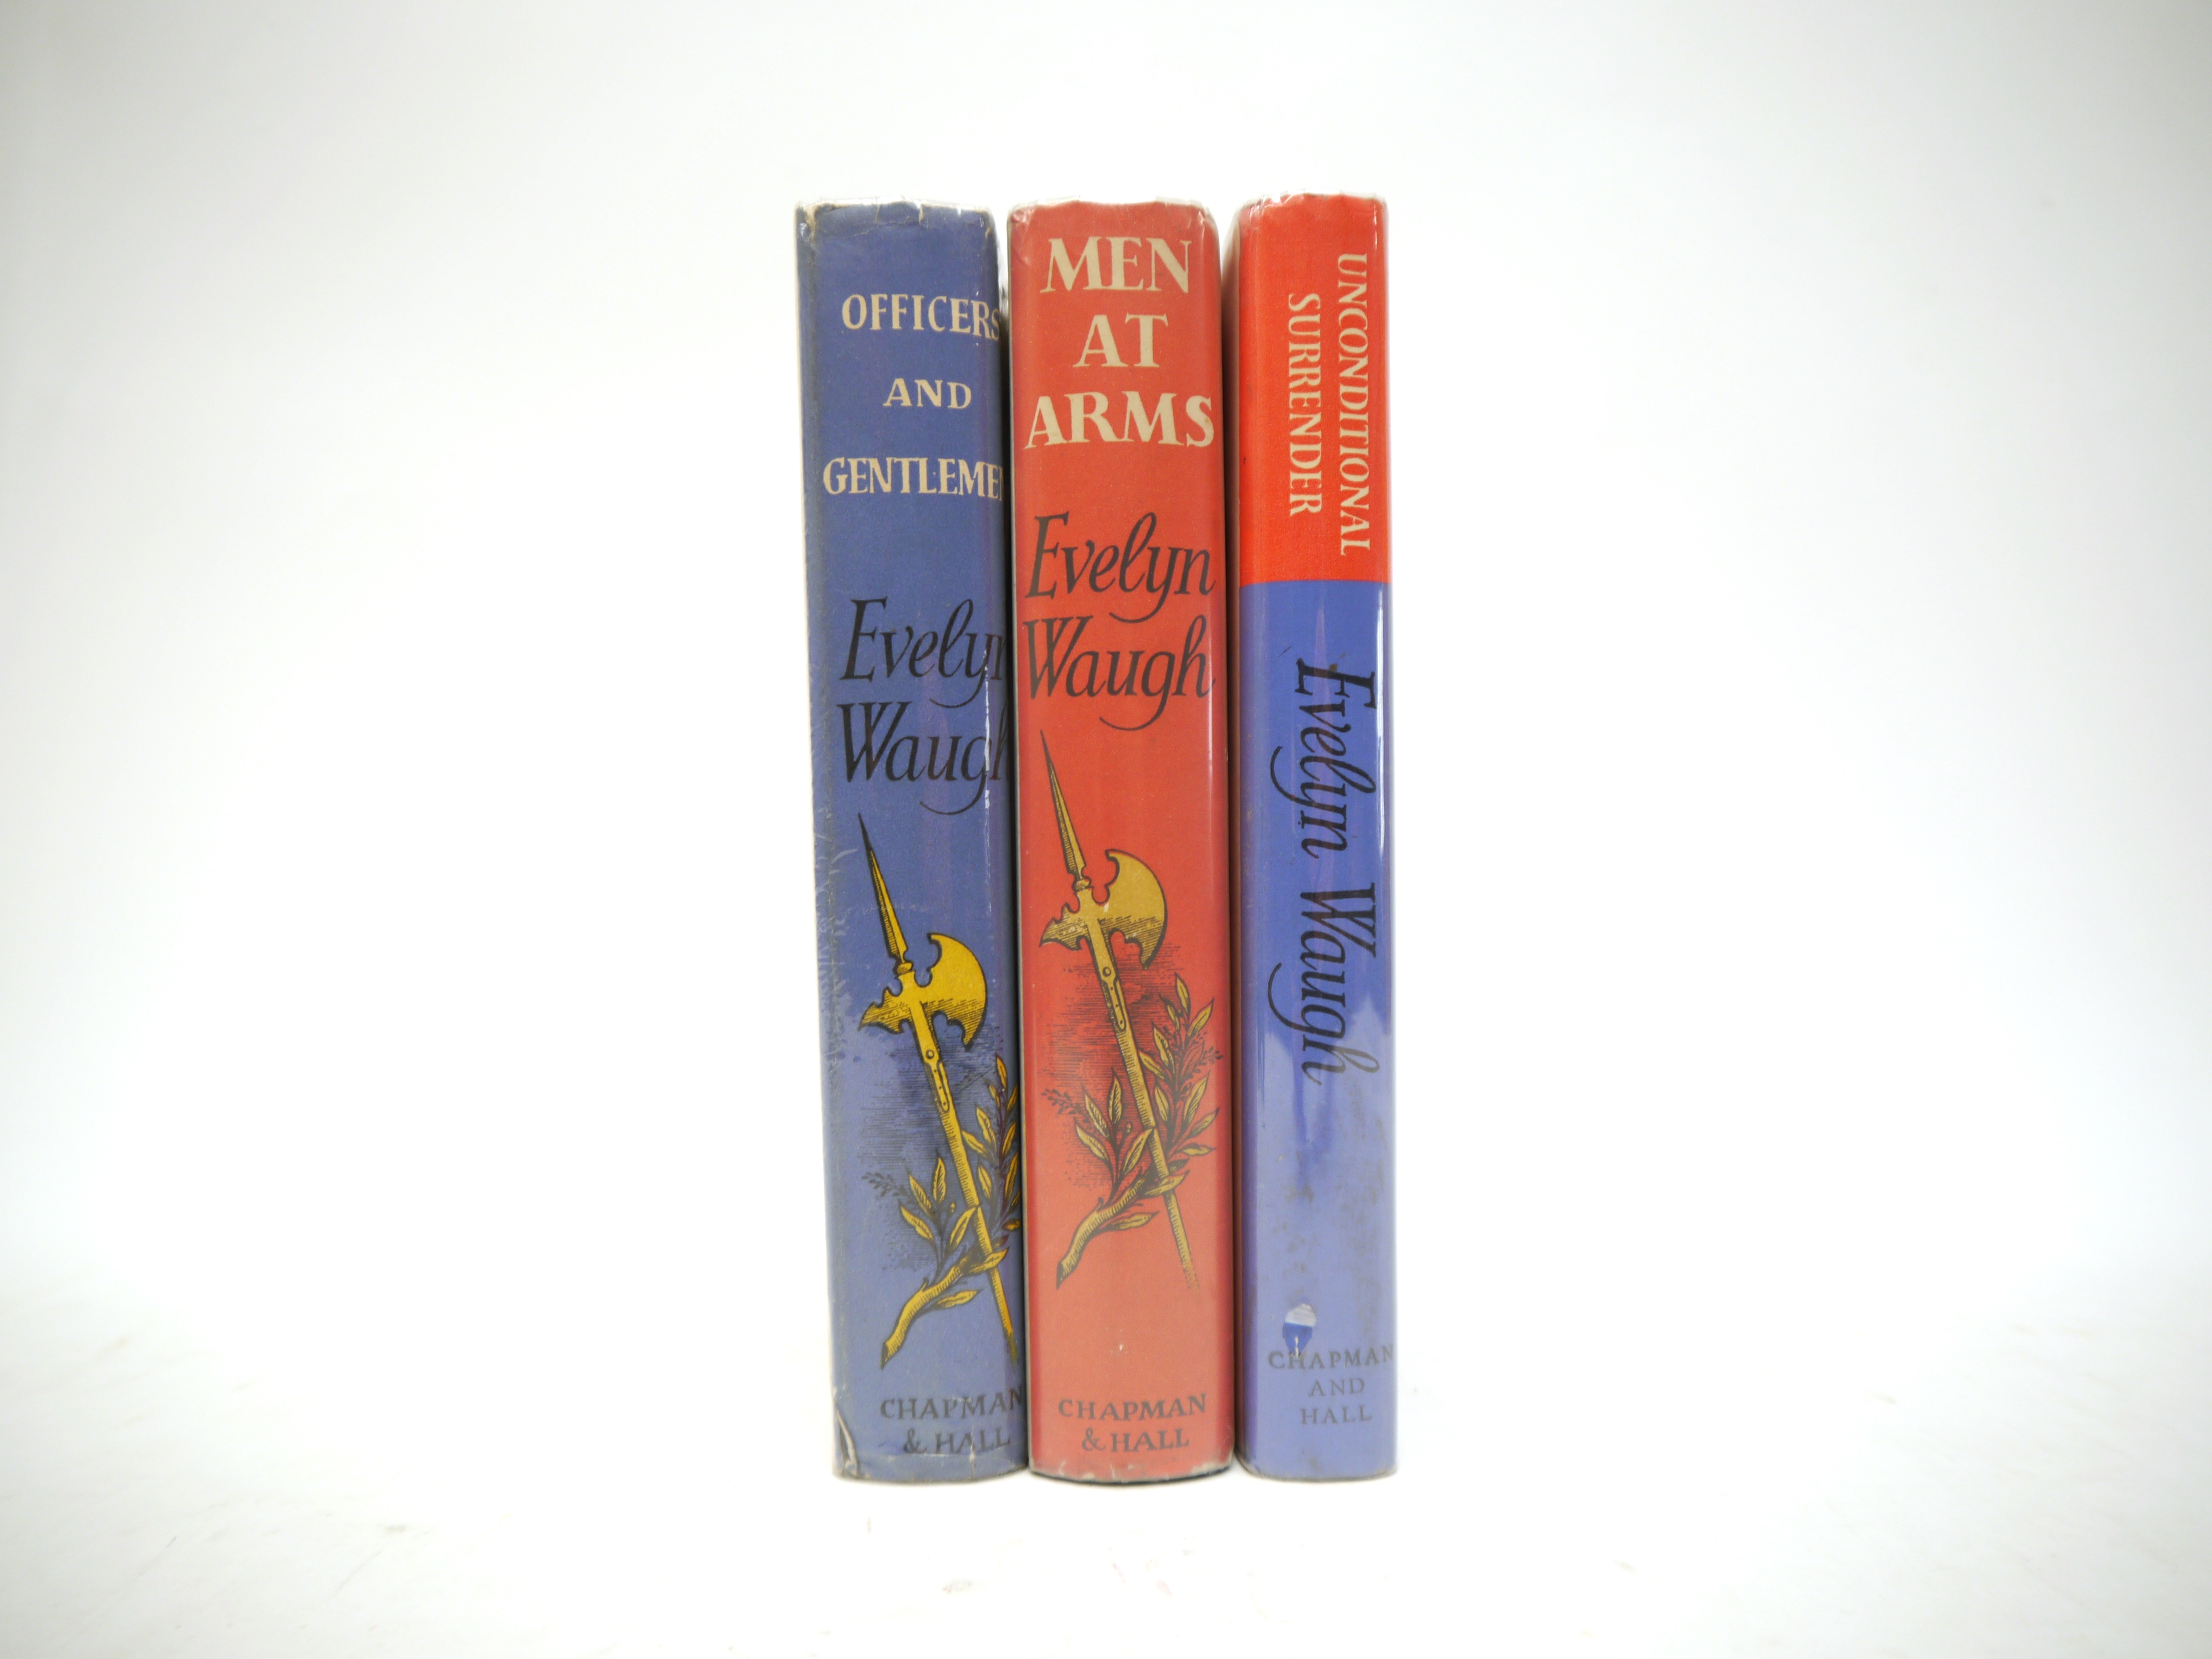 Evelyn Waugh, Sword of Honour trilogy: 'Men at Arms', 1952, 1st edition, 'Officers and Gentlemen', - Image 2 of 4